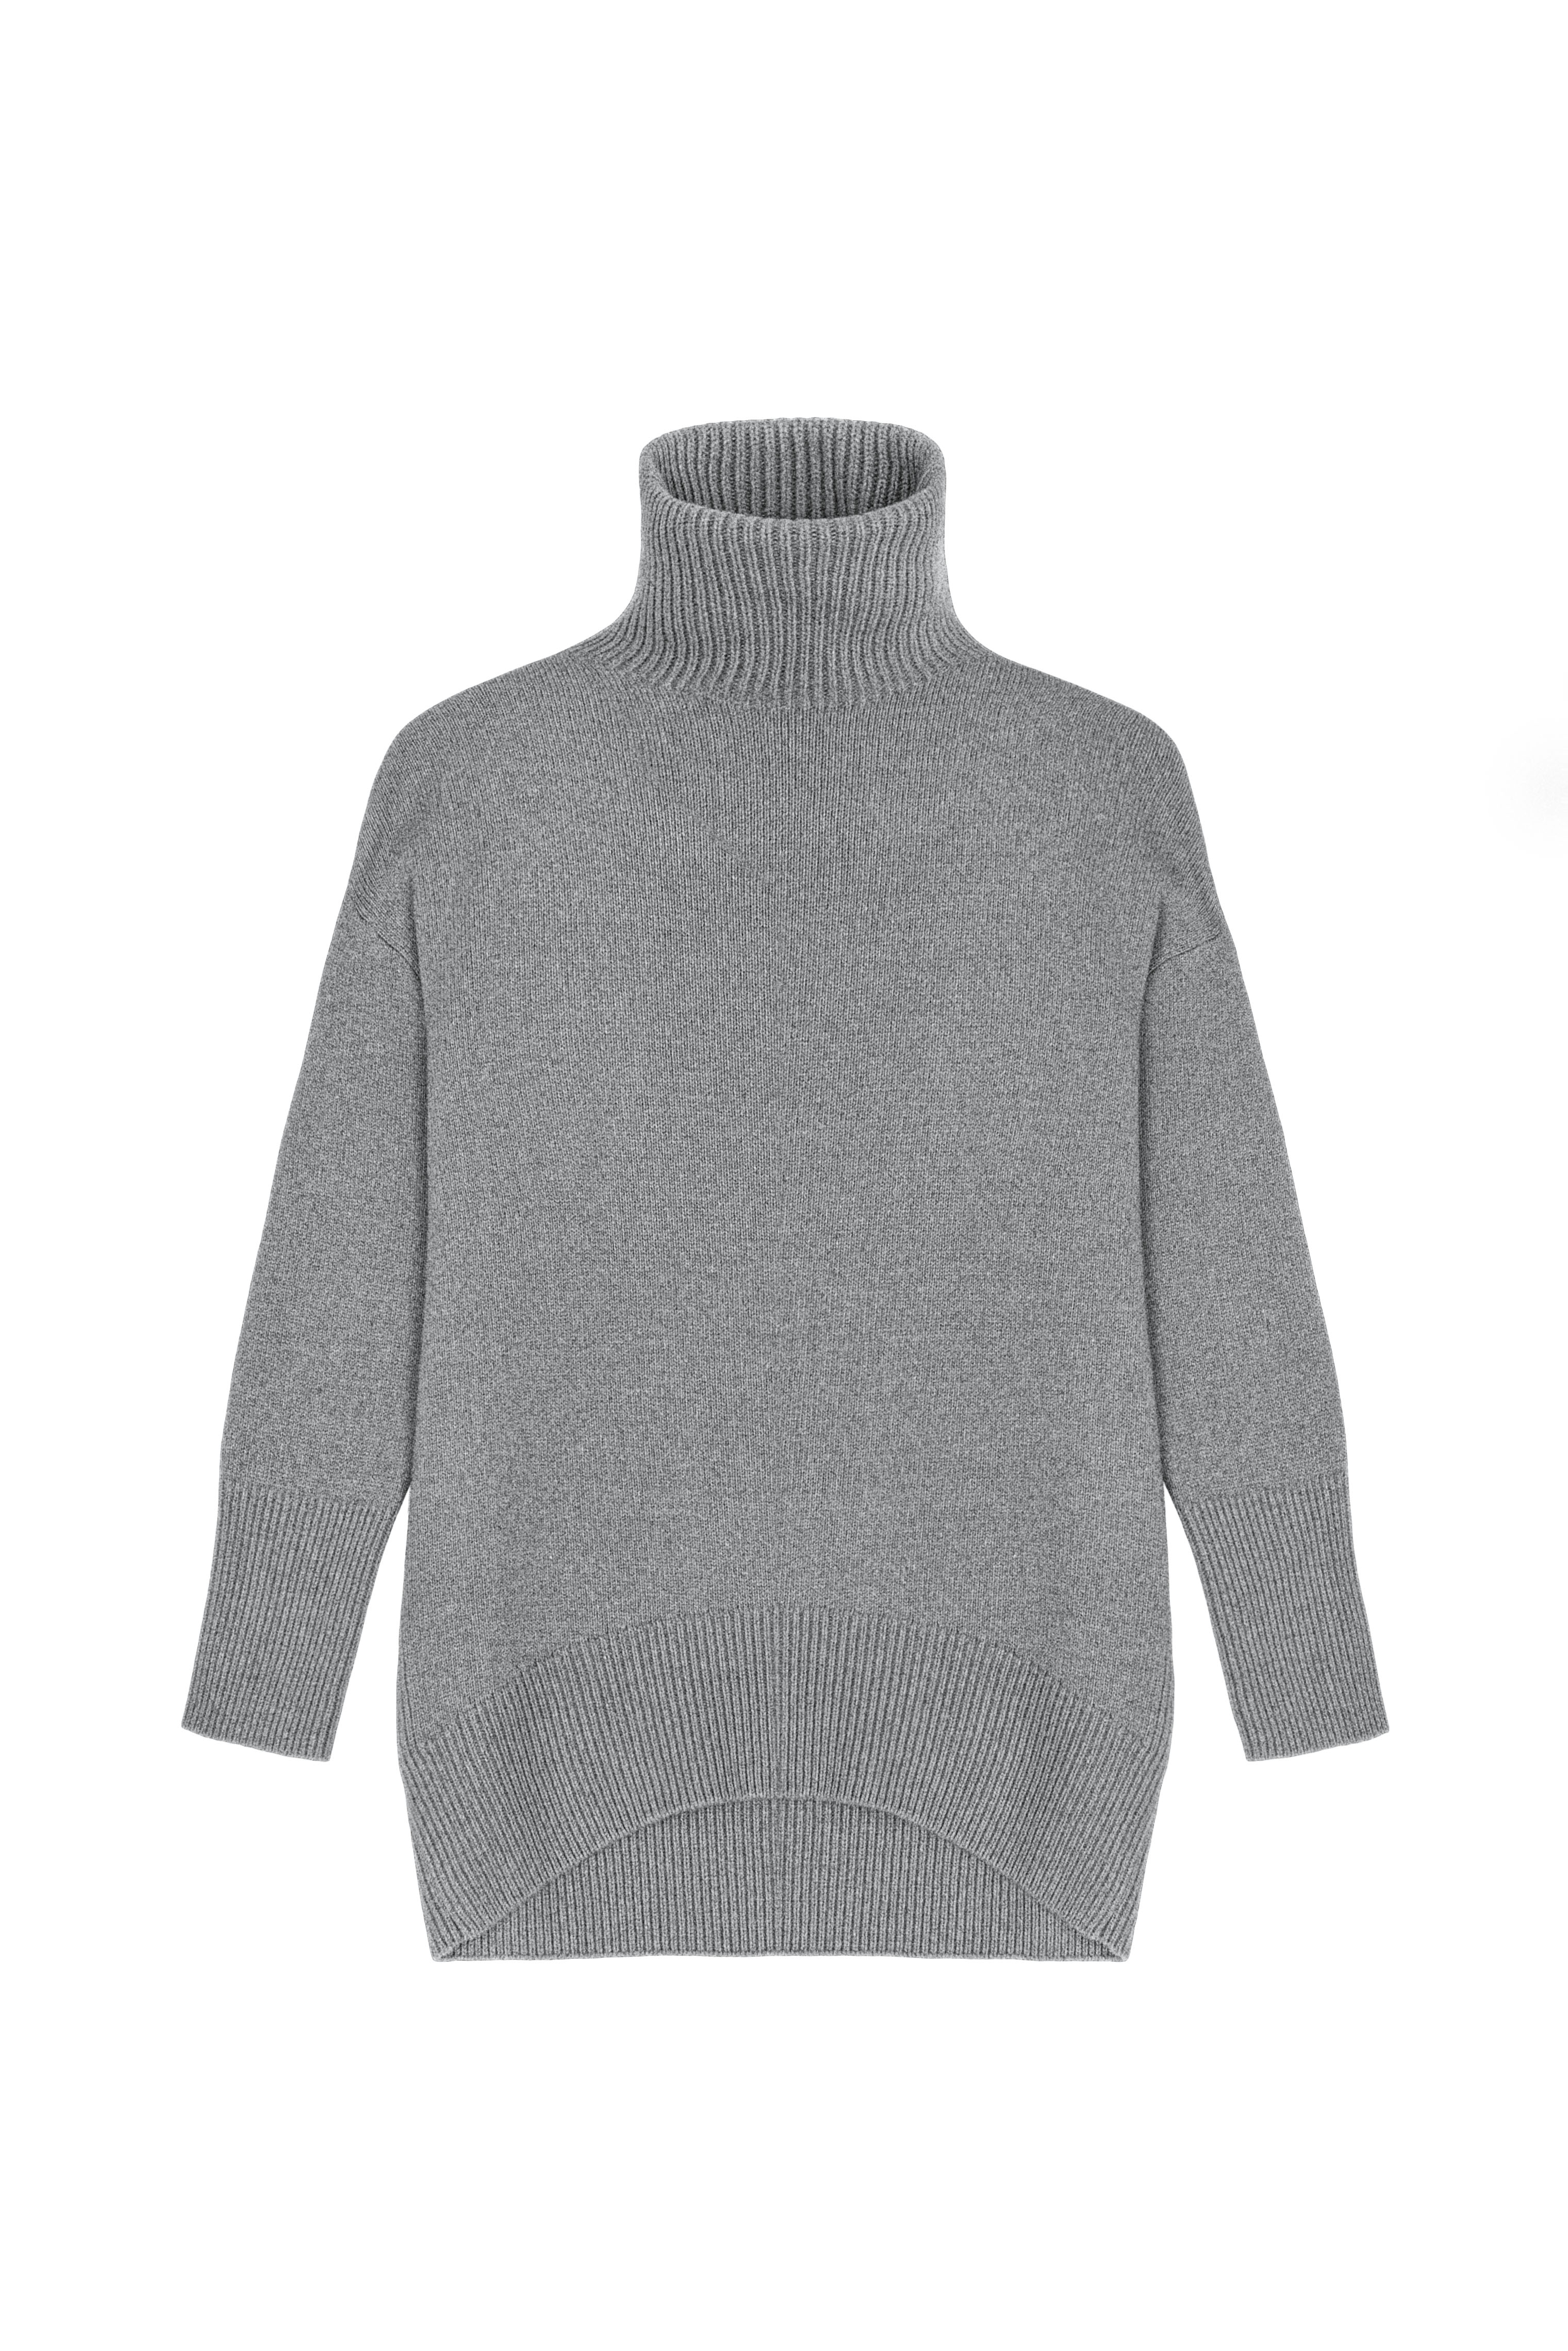 Pull-over 3162-04 Grey from BRUSNiKA